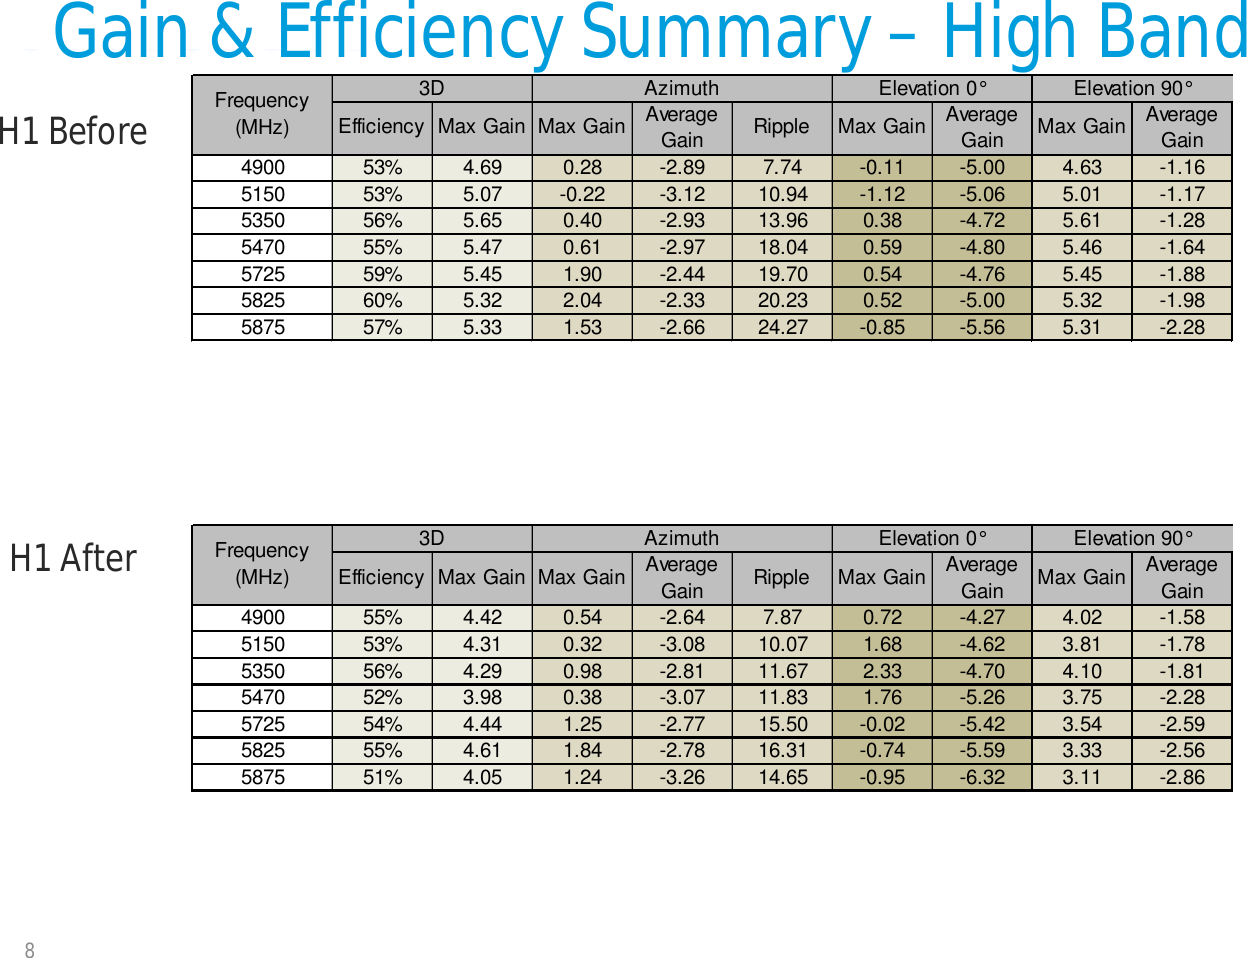 Gain &amp; Efficiency Summary –High Band8H1 BeforeH1 AfterEfficiencyMax GainMax Gain Average Gain Ripple Max Gain Average Gain Max Gain Average Gain4900 53% 4.69 0.28 -2.89 7.74 -0.11 -5.00 4.63 -1.165150 53% 5.07 -0.22 -3.12 10.94 -1.12 -5.06 5.01 -1.175350 56% 5.65 0.40 -2.93 13.96 0.38 -4.72 5.61 -1.285470 55% 5.47 0.61 -2.97 18.04 0.59 -4.80 5.46 -1.645725 59% 5.45 1.90 -2.44 19.70 0.54 -4.76 5.45 -1.885825 60% 5.32 2.04 -2.33 20.23 0.52 -5.00 5.32 -1.985875 57% 5.33 1.53 -2.66 24.27 -0.85 -5.56 5.31 -2.28Frequency (MHz)3D Elevation 0°Azimuth Elevation 90°EfficiencyMax GainMax Gain Average Gain Ripple Max Gain Average Gain Max Gain Average Gain4900 55% 4.42 0.54 -2.64 7.87 0.72 -4.27 4.02 -1.585150 53% 4.31 0.32 -3.08 10.07 1.68 -4.62 3.81 -1.785350 56% 4.29 0.98 -2.81 11.67 2.33 -4.70 4.10 -1.815470 52% 3.98 0.38 -3.07 11.83 1.76 -5.26 3.75 -2.285725 54% 4.44 1.25 -2.77 15.50 -0.02 -5.42 3.54 -2.595825 55% 4.61 1.84 -2.78 16.31 -0.74 -5.59 3.33 -2.565875 51% 4.05 1.24 -3.26 14.65 -0.95 -6.32 3.11 -2.86Frequency (MHz)3D Azimuth Elevation 0° Elevation 90°